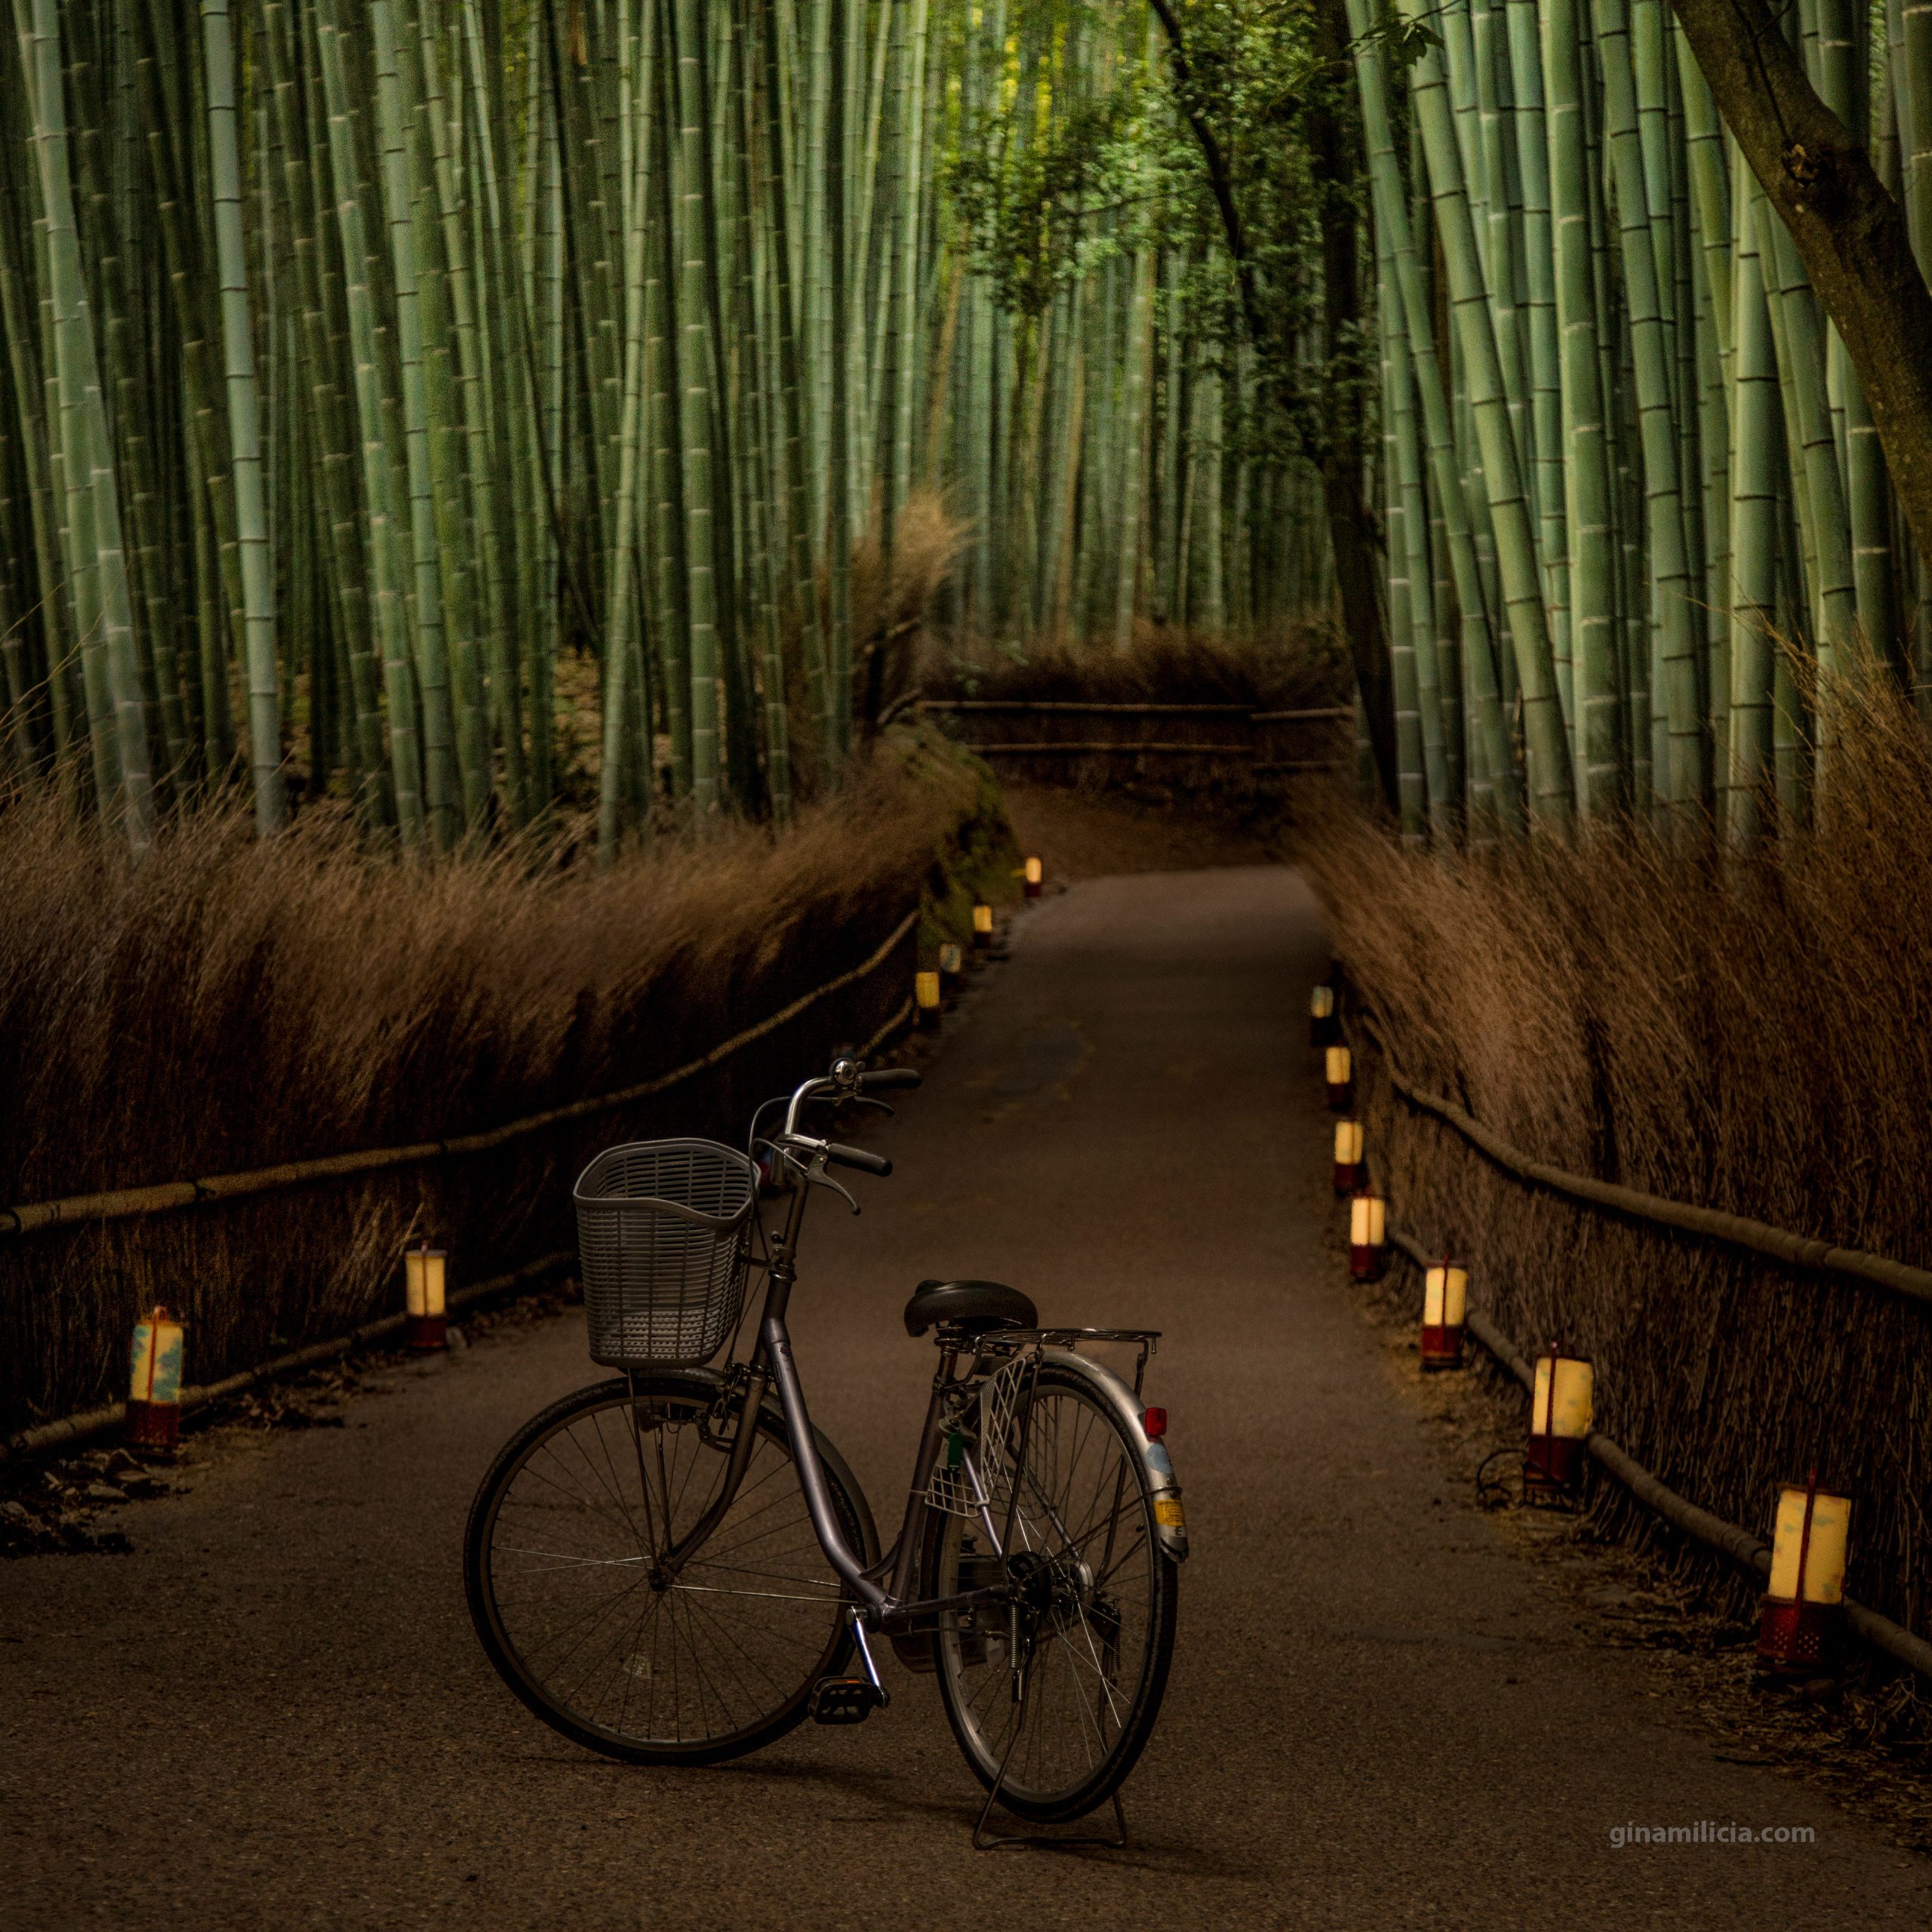 Bike in bamboo forest in Kyoto